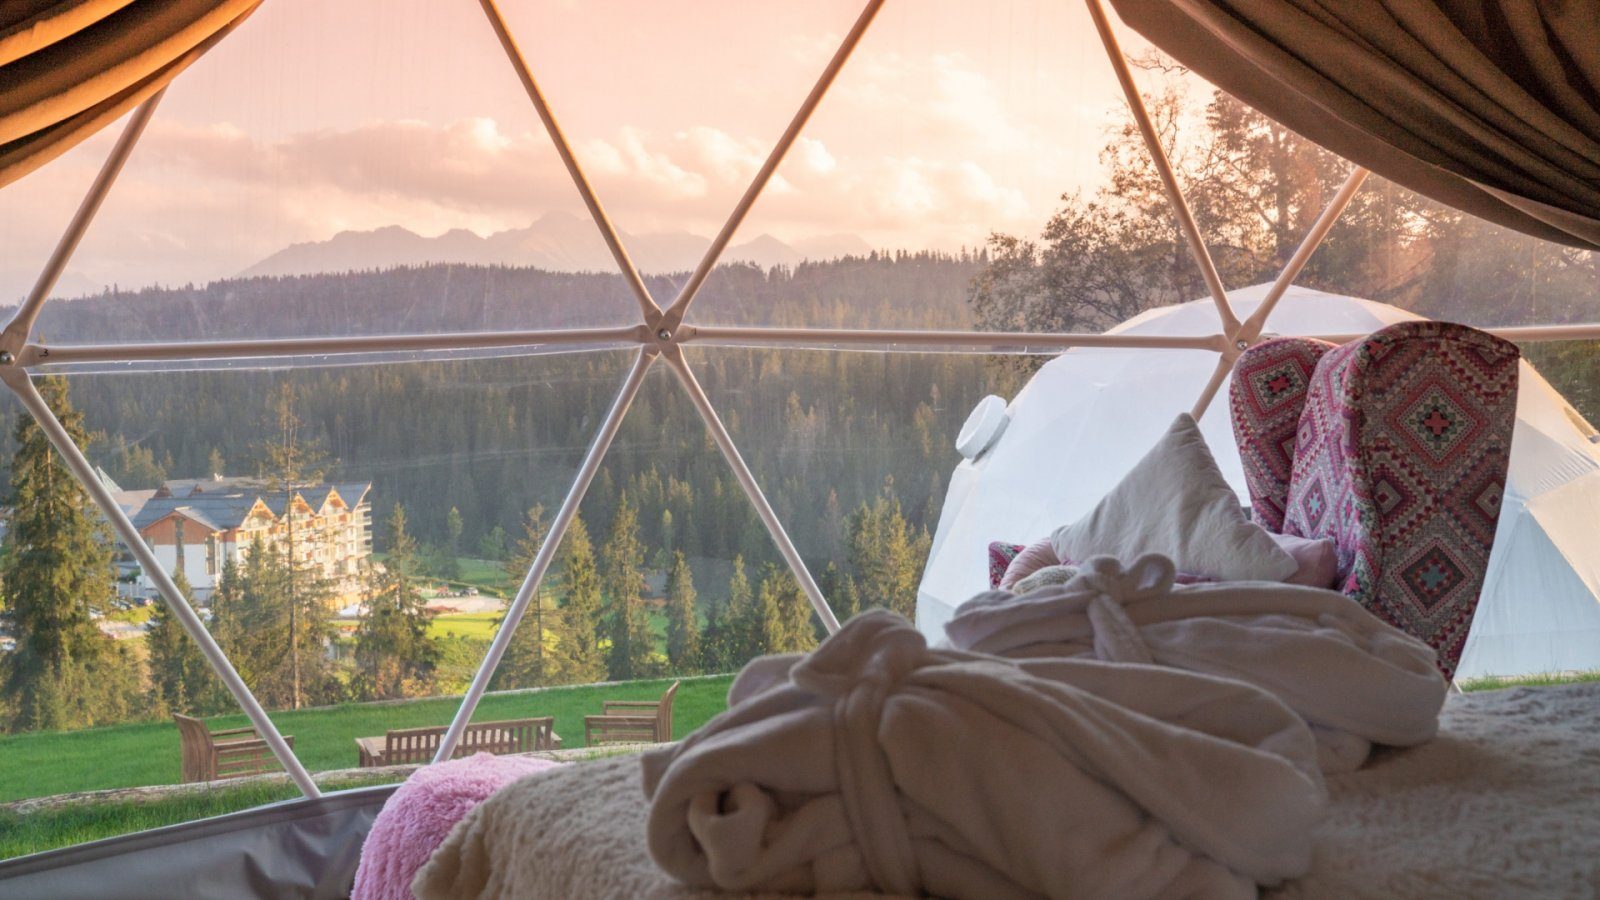 A luxurious tent? Glamping is a new dimension of camping. - Visit 